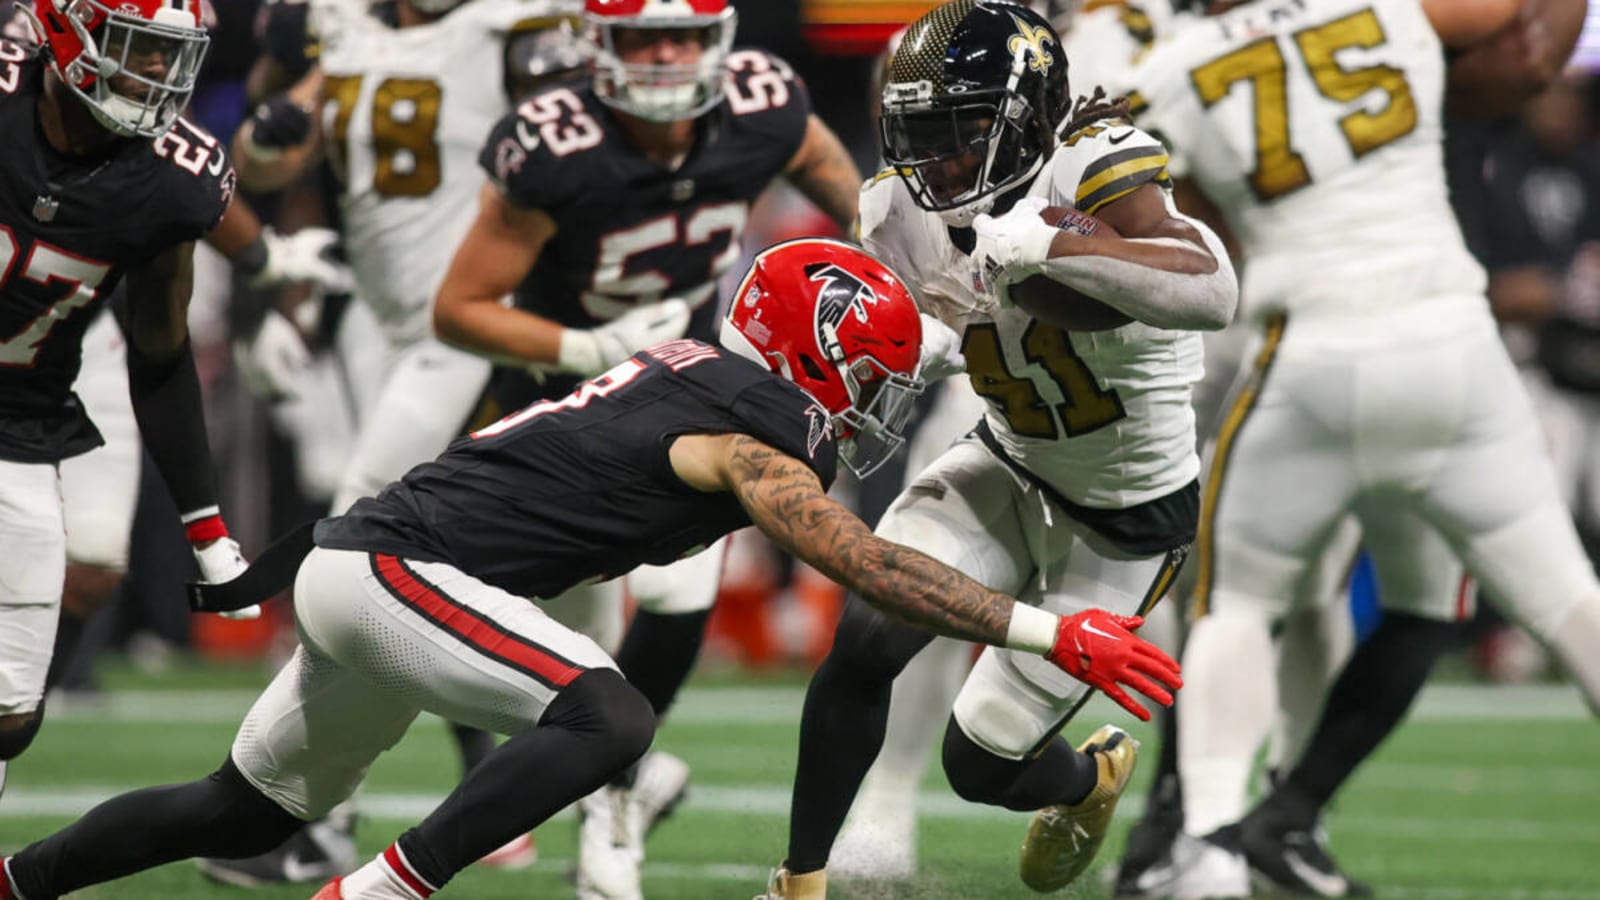 Bates Comments on Rachaad White, Bucs Run Game vs. Falcons Defense